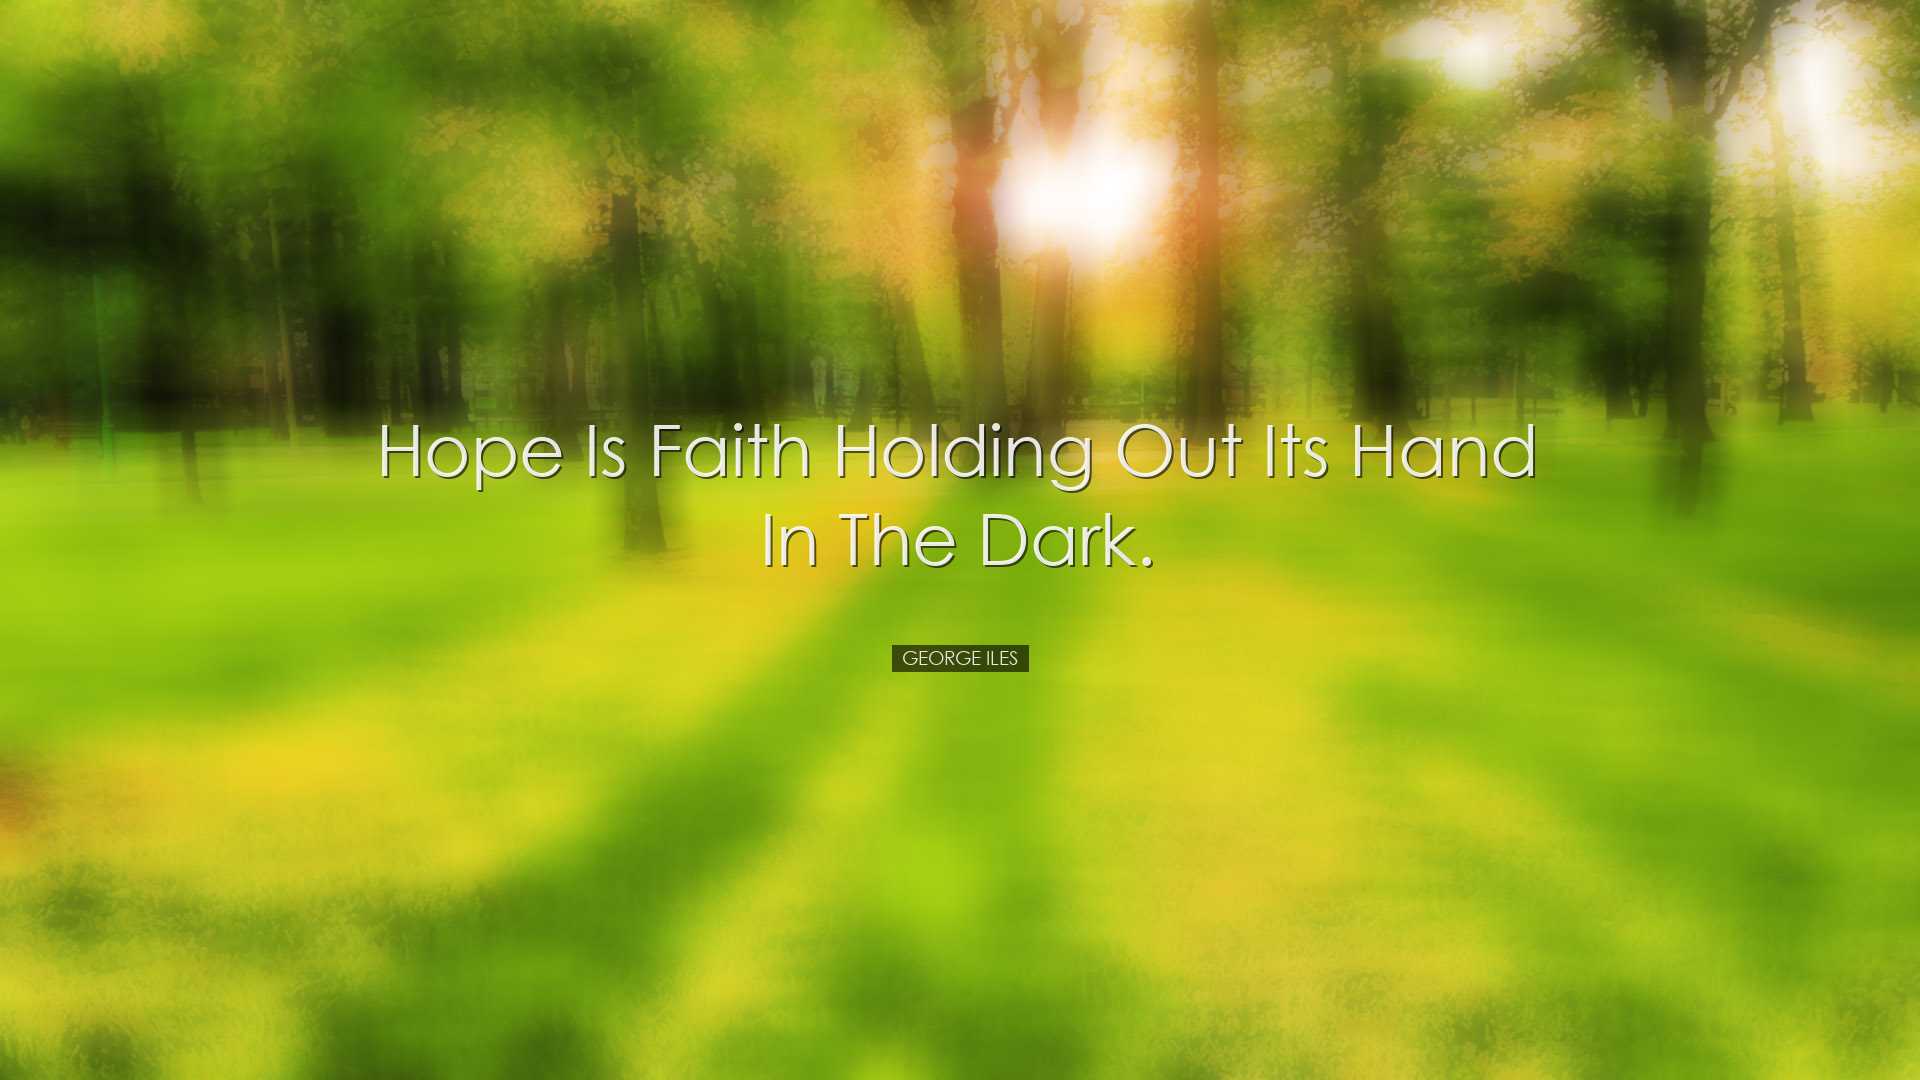 Hope is faith holding out its hand in the dark. - George Iles